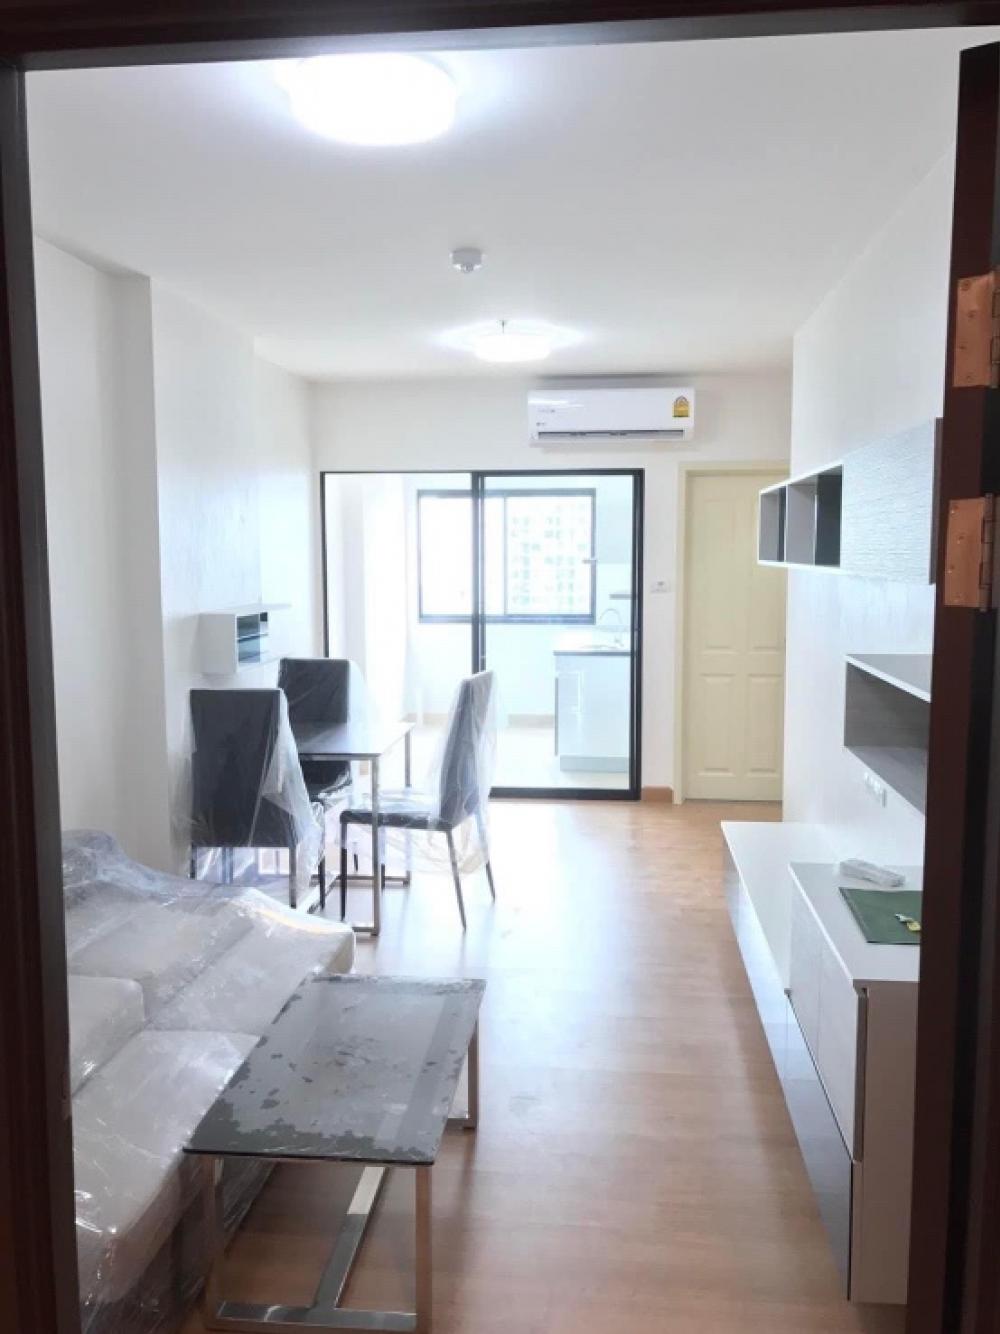 For RentCondoChaengwatana, Muangthong : 📣 Condo for rent at Supalai Loft Chaengwattana (Supalai Loft Chaengwattana), Studio room, size 33 sq m, floor 20, complete with furniture and electrical appliances. Ready to move in ✨